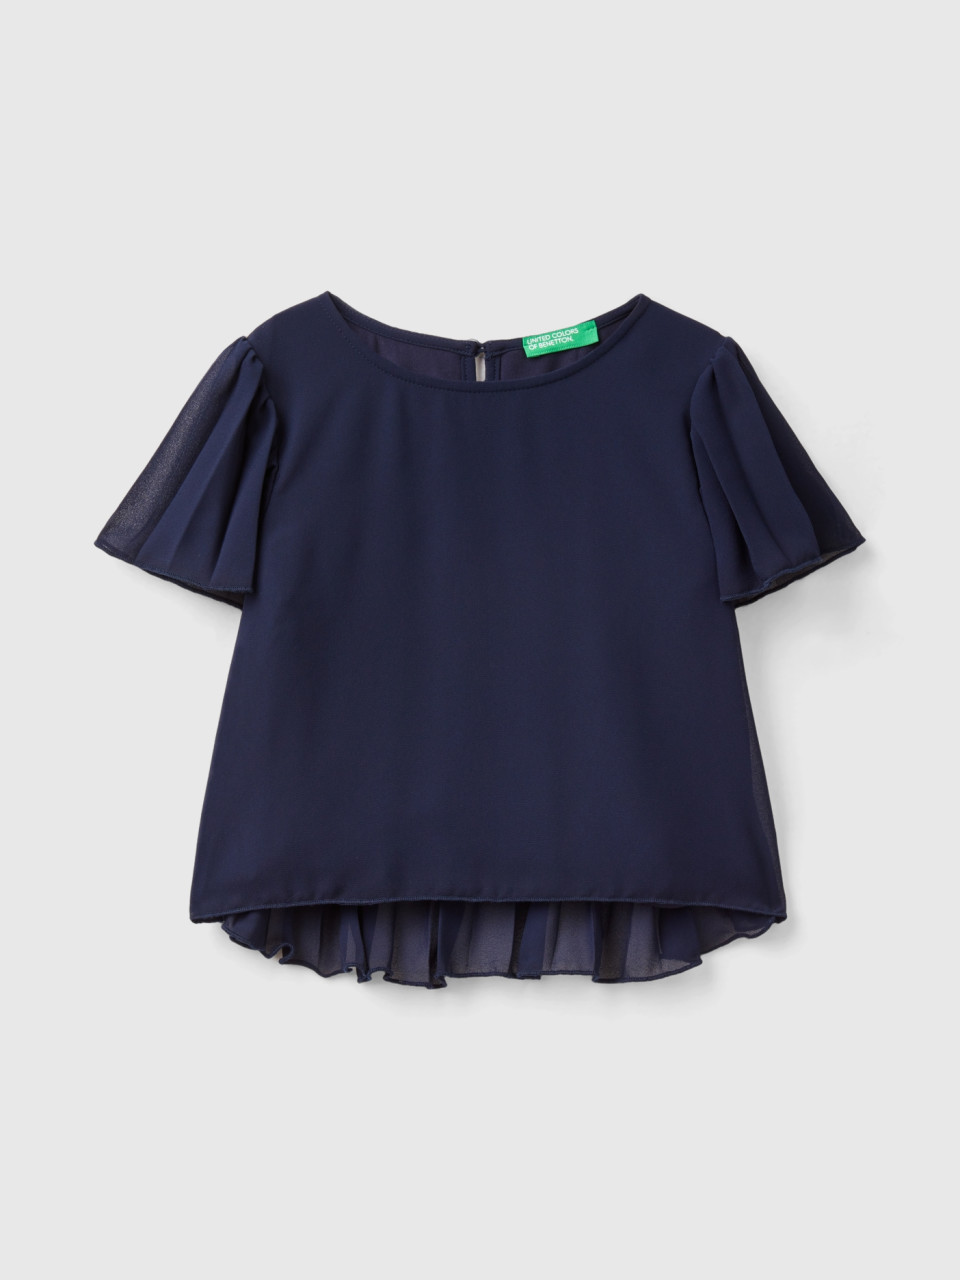 Benetton, Blouse With Pleated Details, Dark Blue, Kids